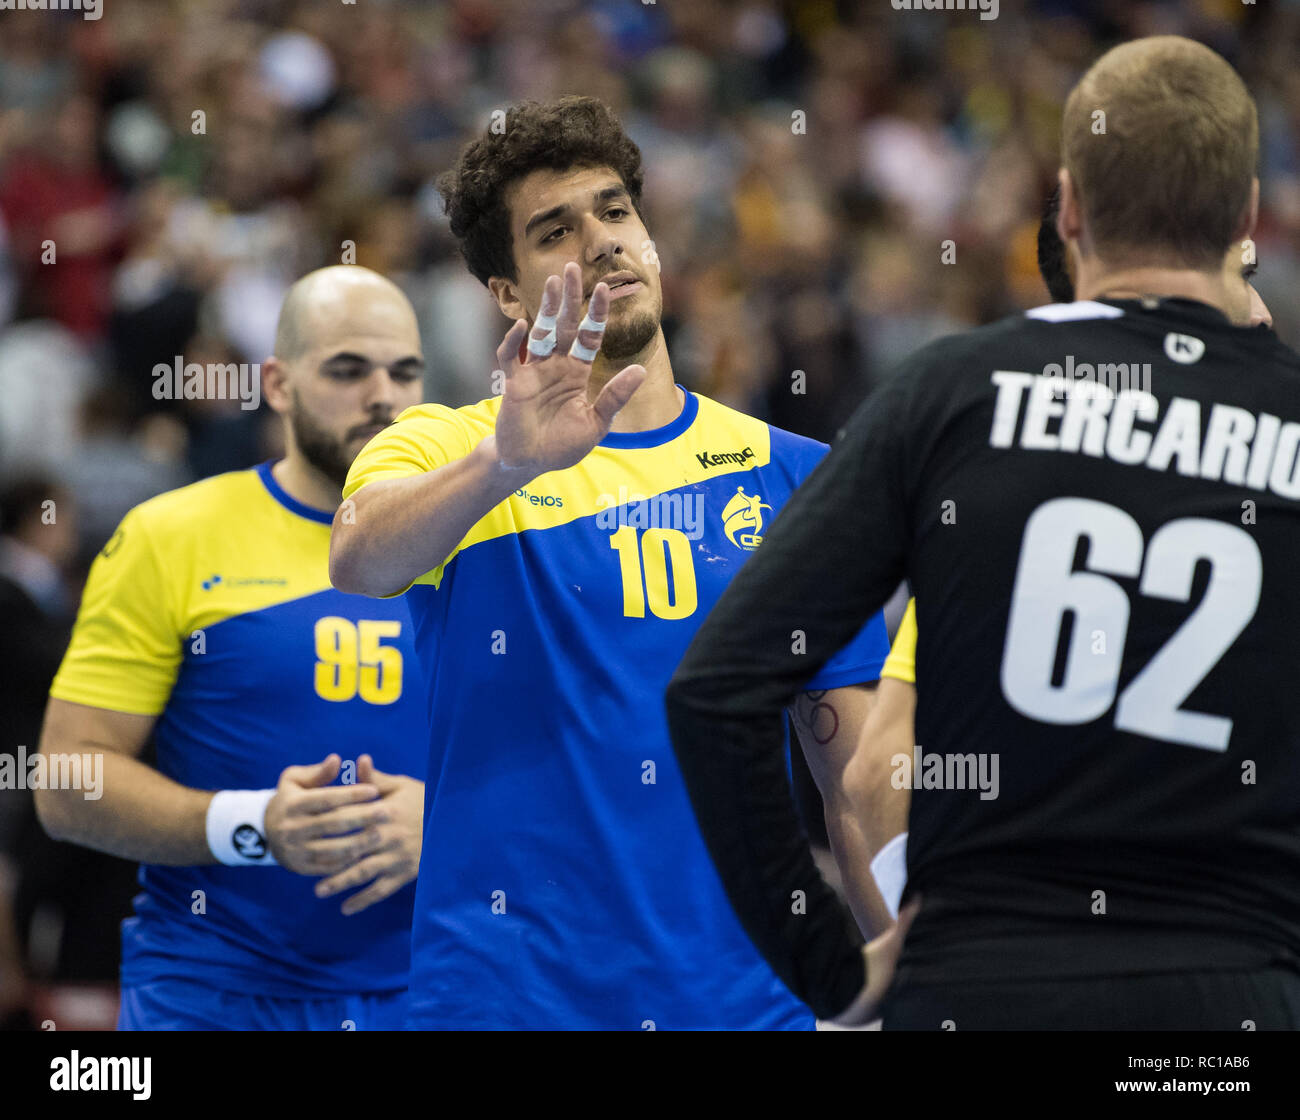 Berlin, Germany. 12th Jan, 2019. Handball: WM, Germany - Brazil, preliminary round, group A, 2nd matchday. The Brazilians (l-r) Gustavo Rodrigues and Jose Guilherme Toledo will join their goalkeeper Leonardo Tercariol at the end of the game. Credit: Soeren Stache/dpa/Alamy Live News Stock Photo